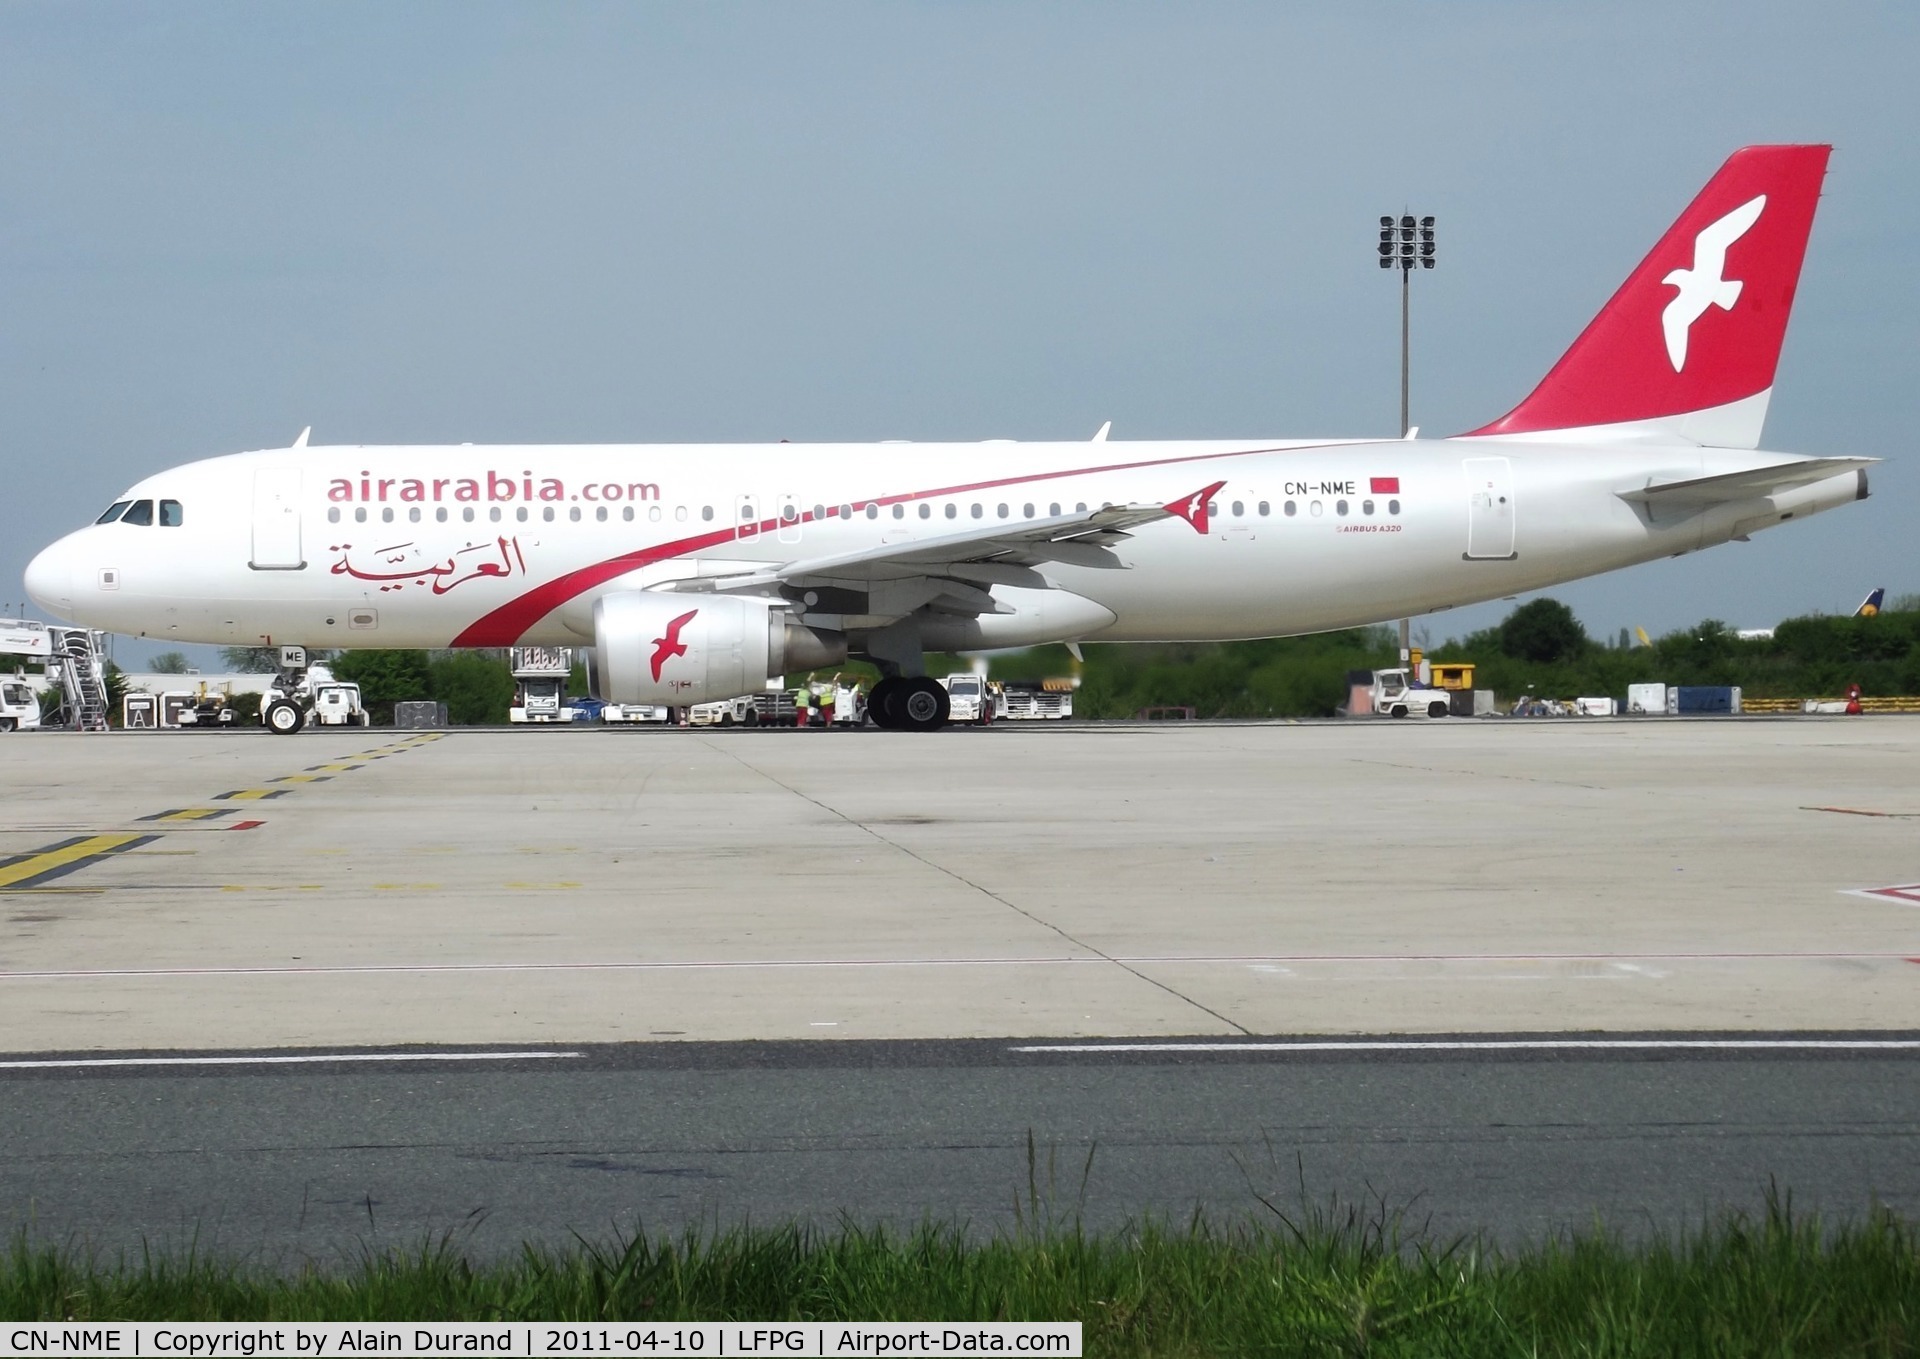 CN-NME, 2004 Airbus A320-214 C/N 2166, Delivered in 2004 to parent company Air Arabia as A6-ABB, transfered to Air Arabia Maroc in March 2011